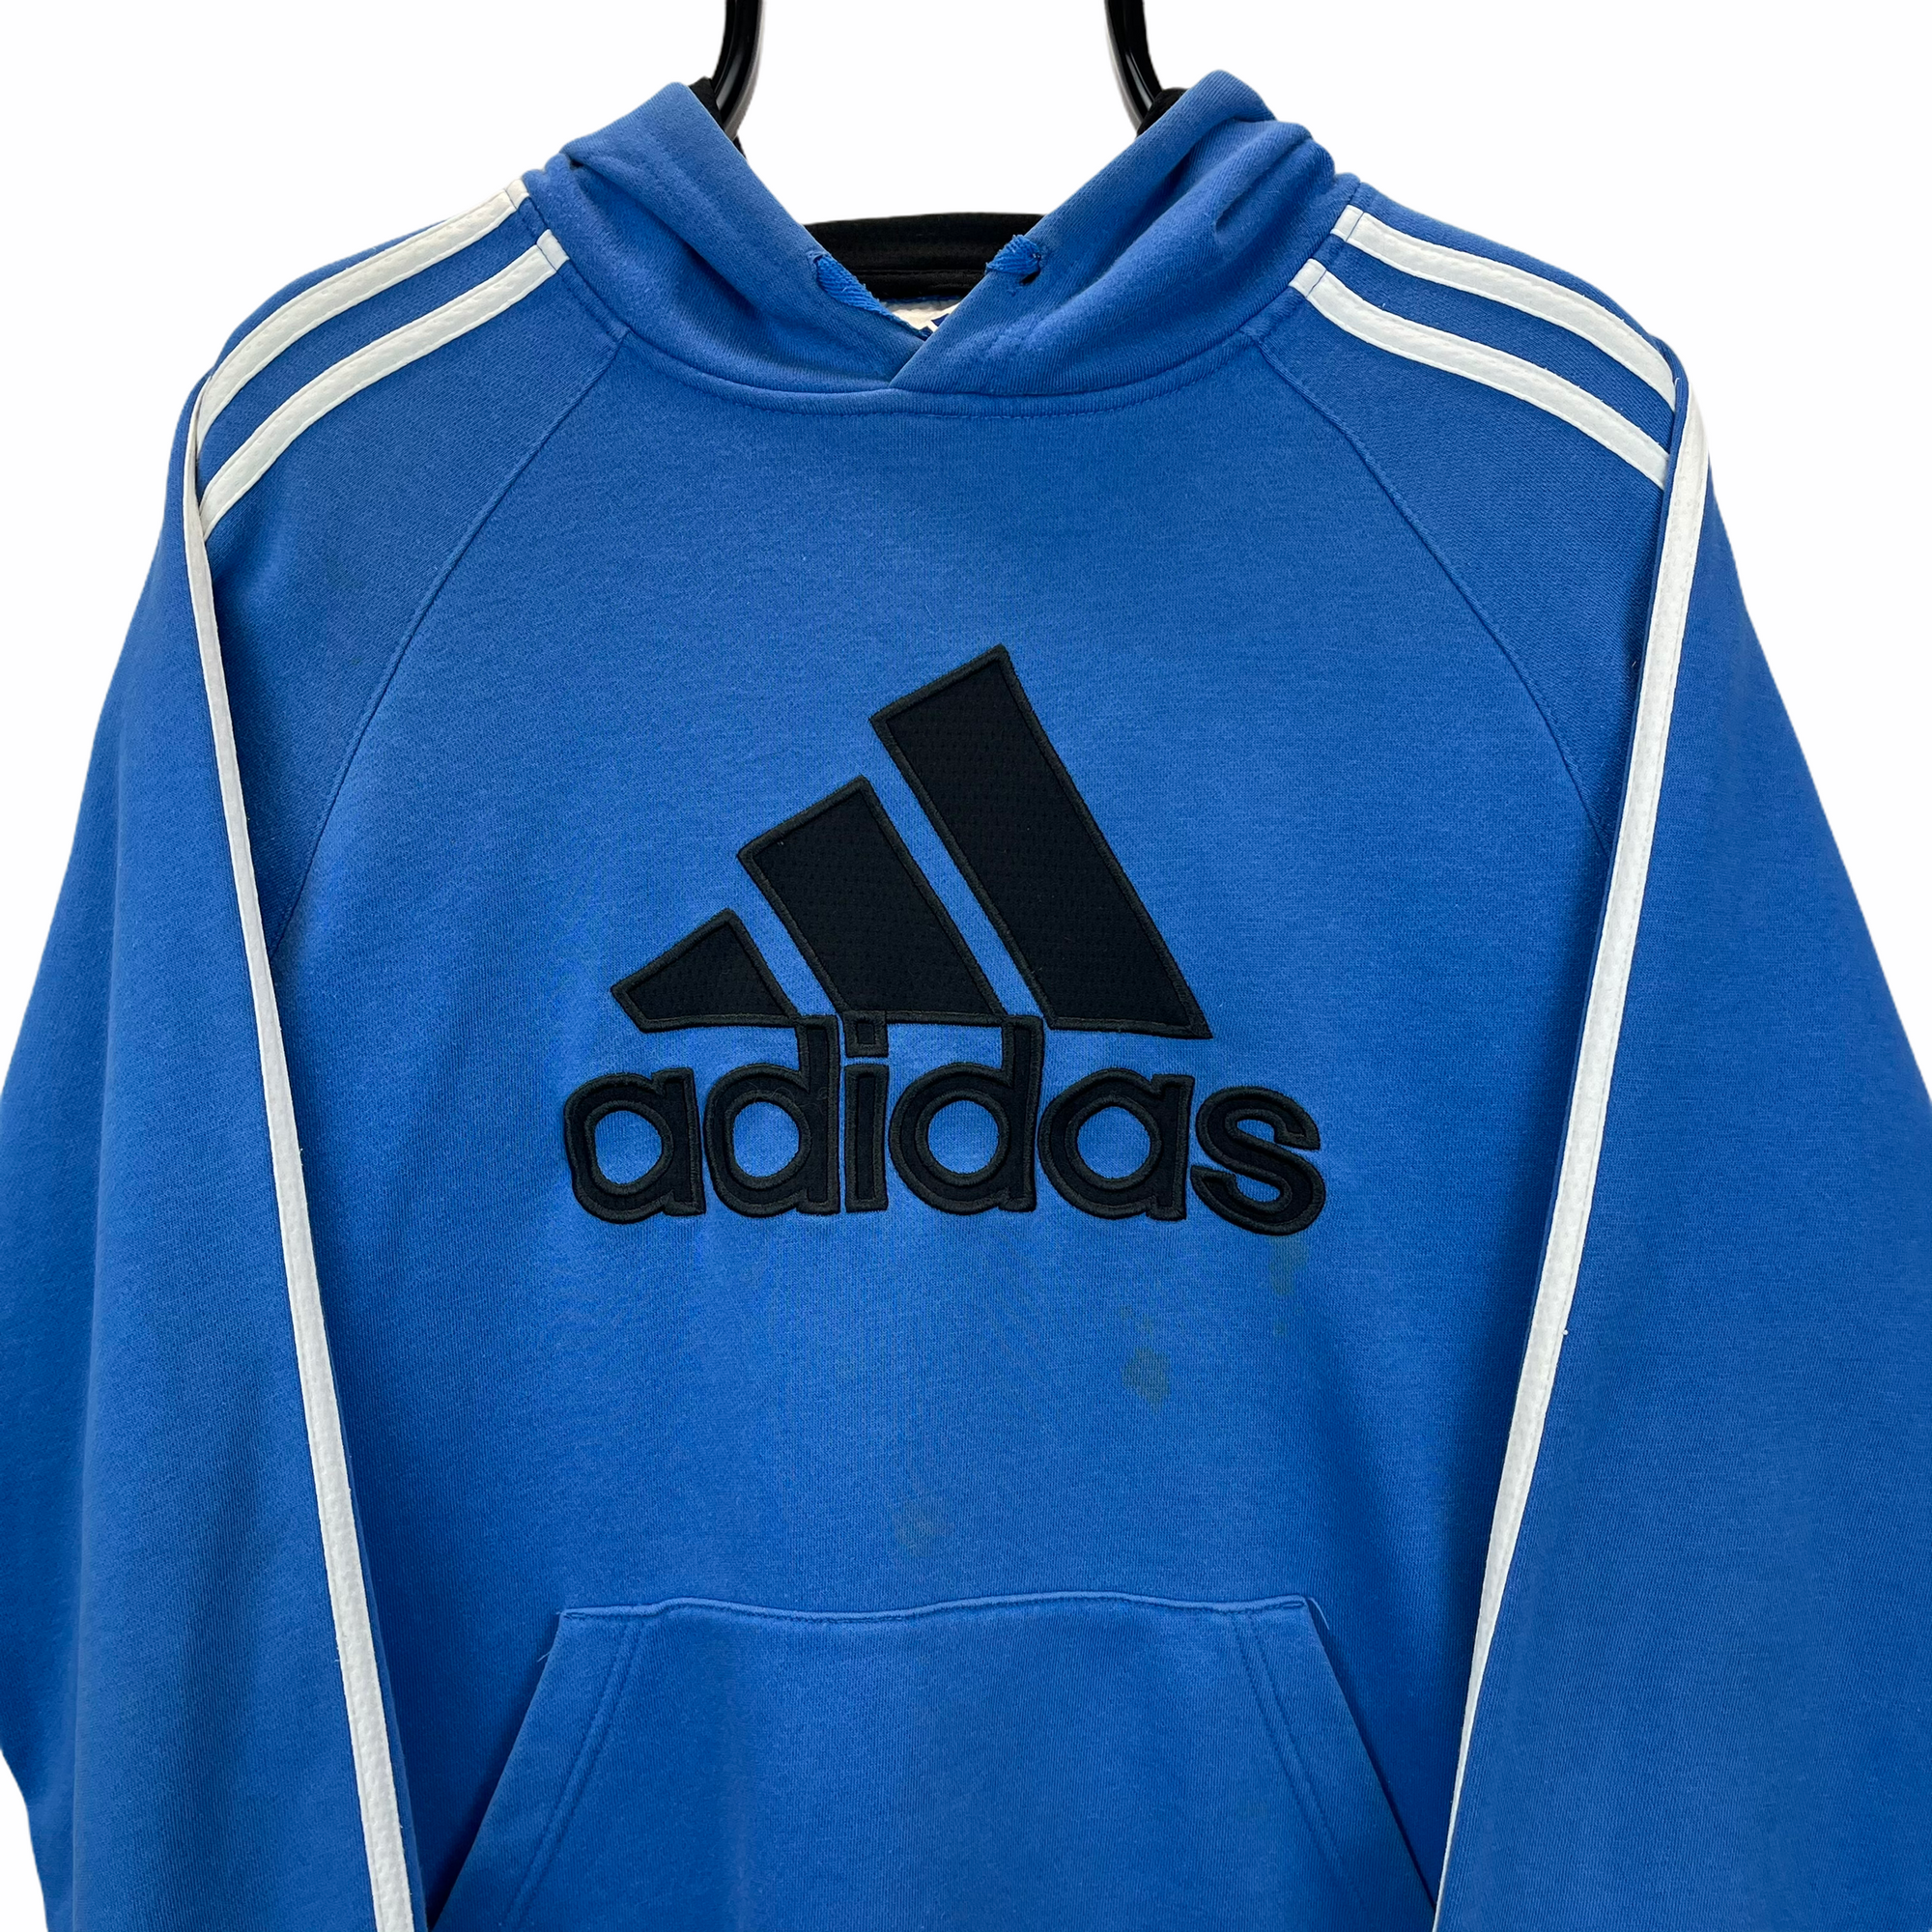 VINTAGE 90S ADIDAS SPELLOUT HOODIE IN BLUE, BLACK & WHITE - MEN'S LARGE/WOMEN'S XL